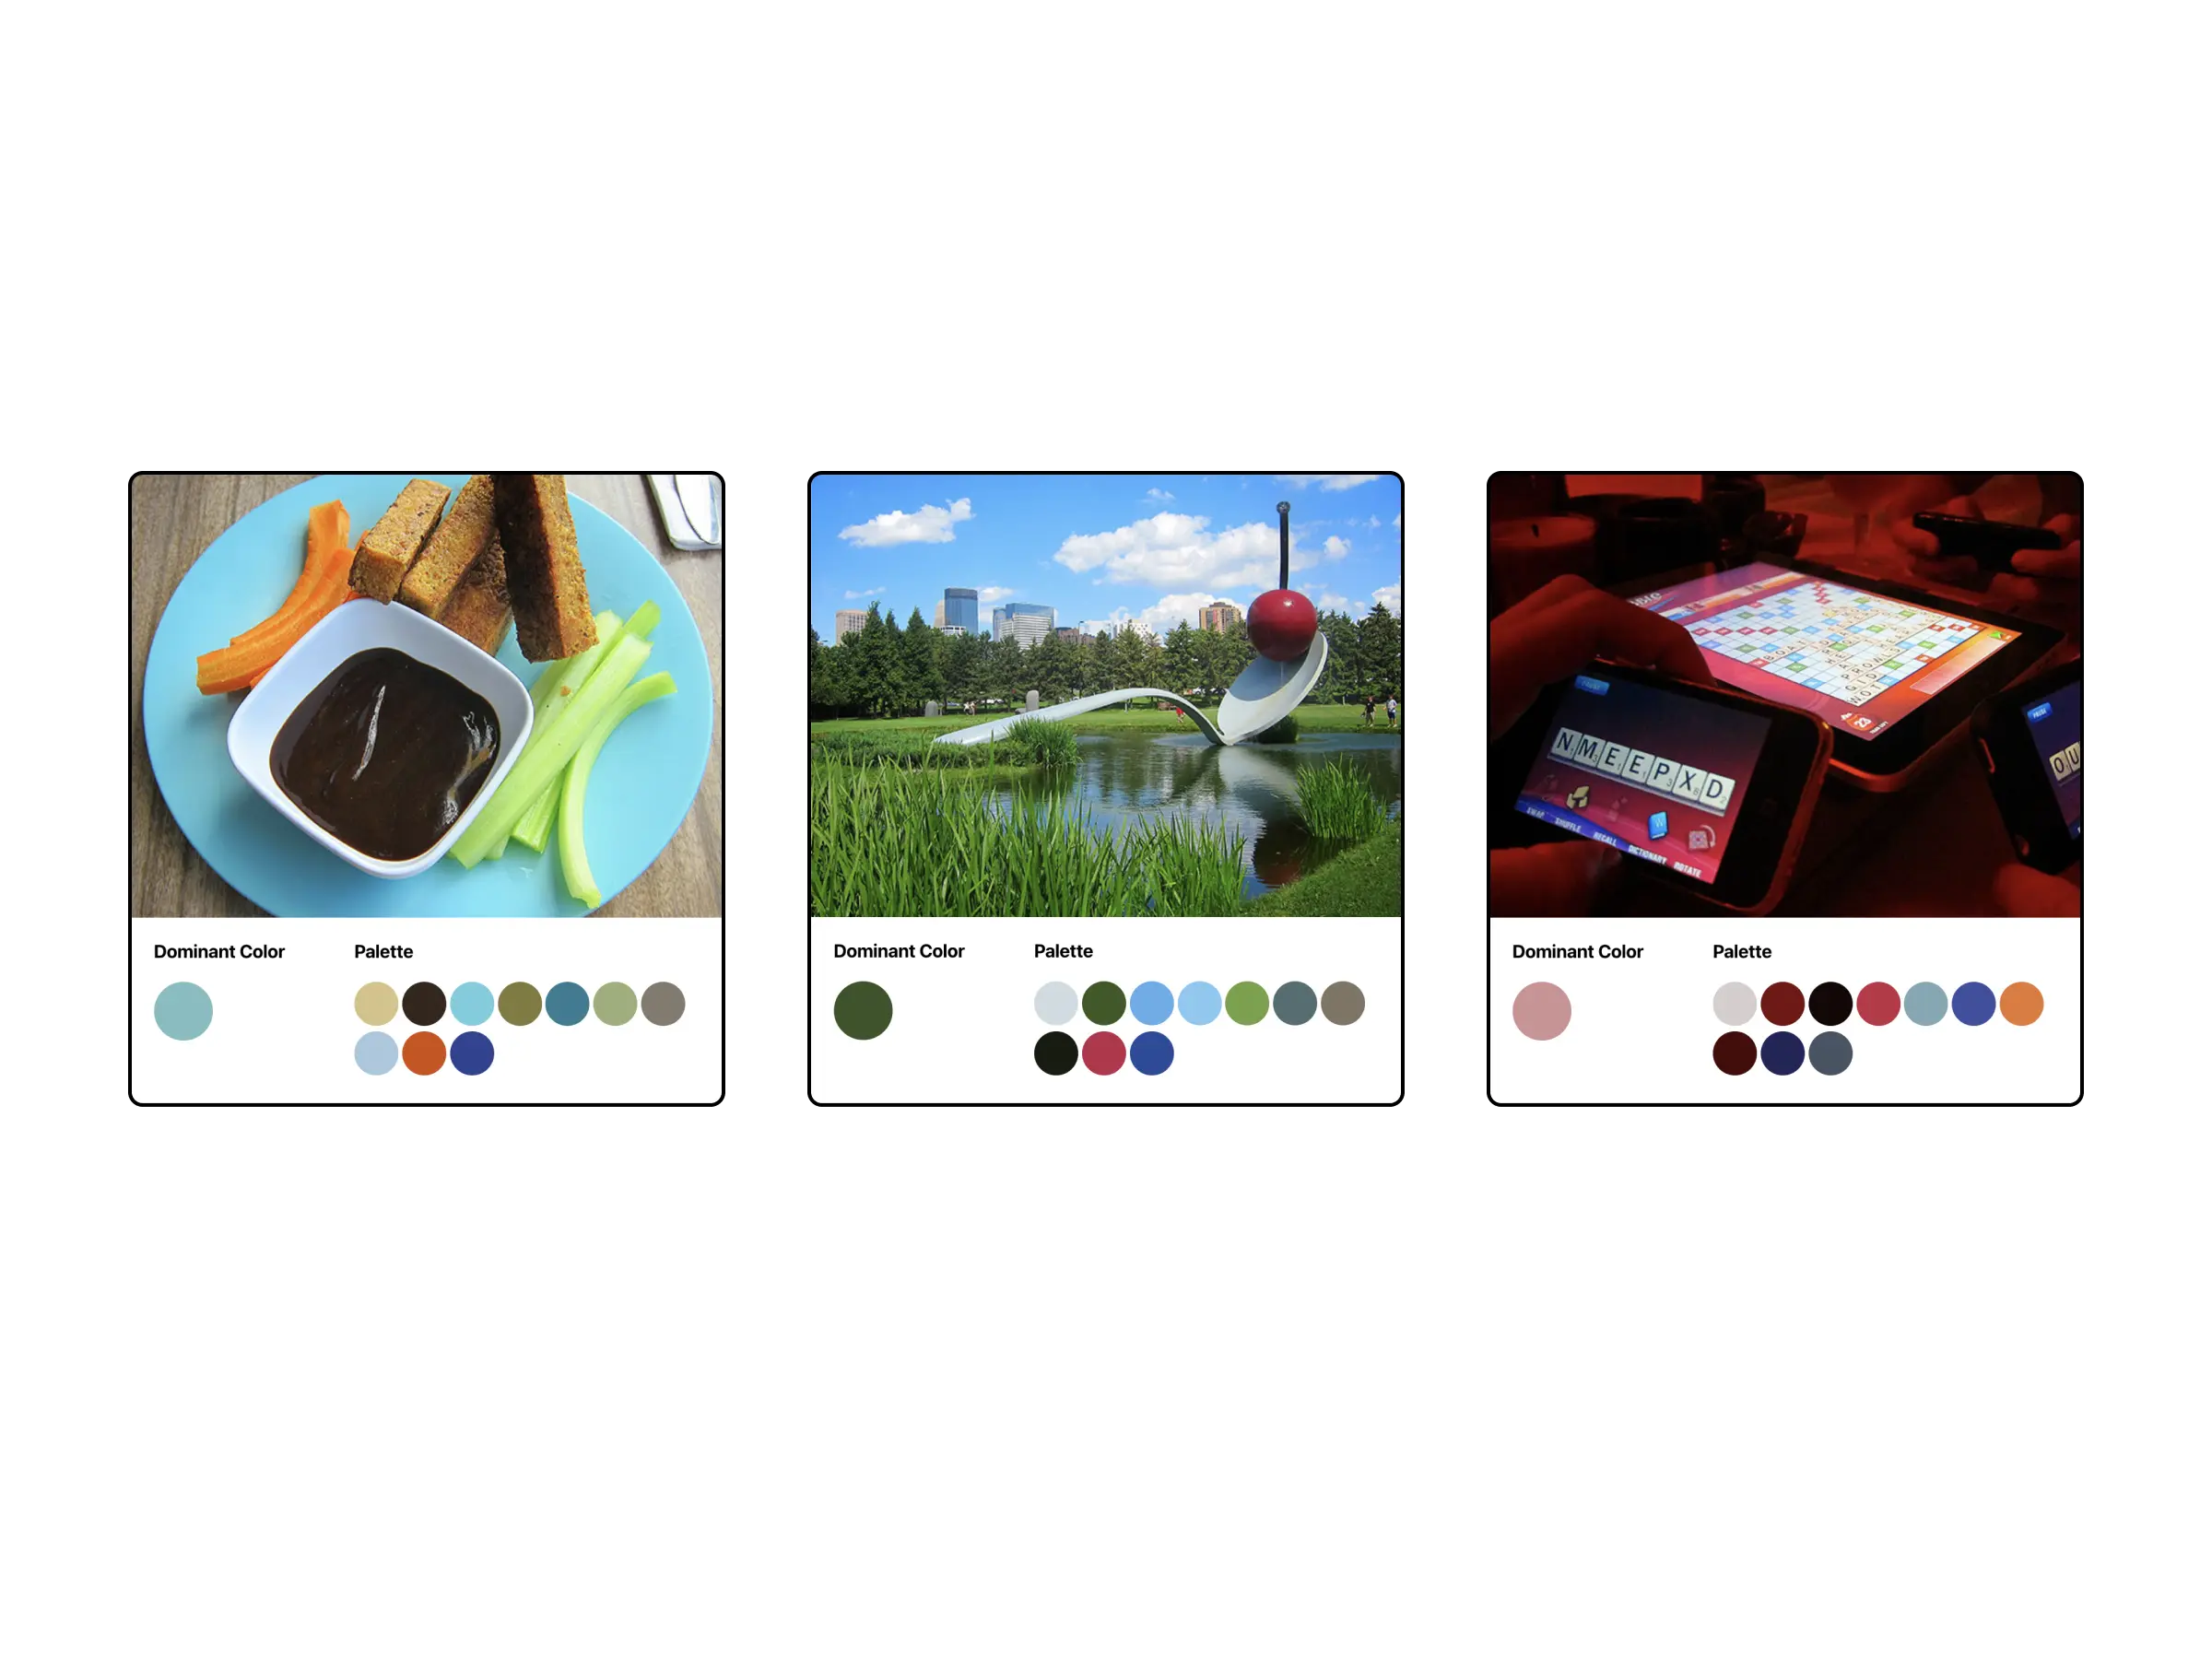 three photographs of diverse subjects, below each is a swatch of color labeled dominant color, and another set of ten color swatched labeled palette